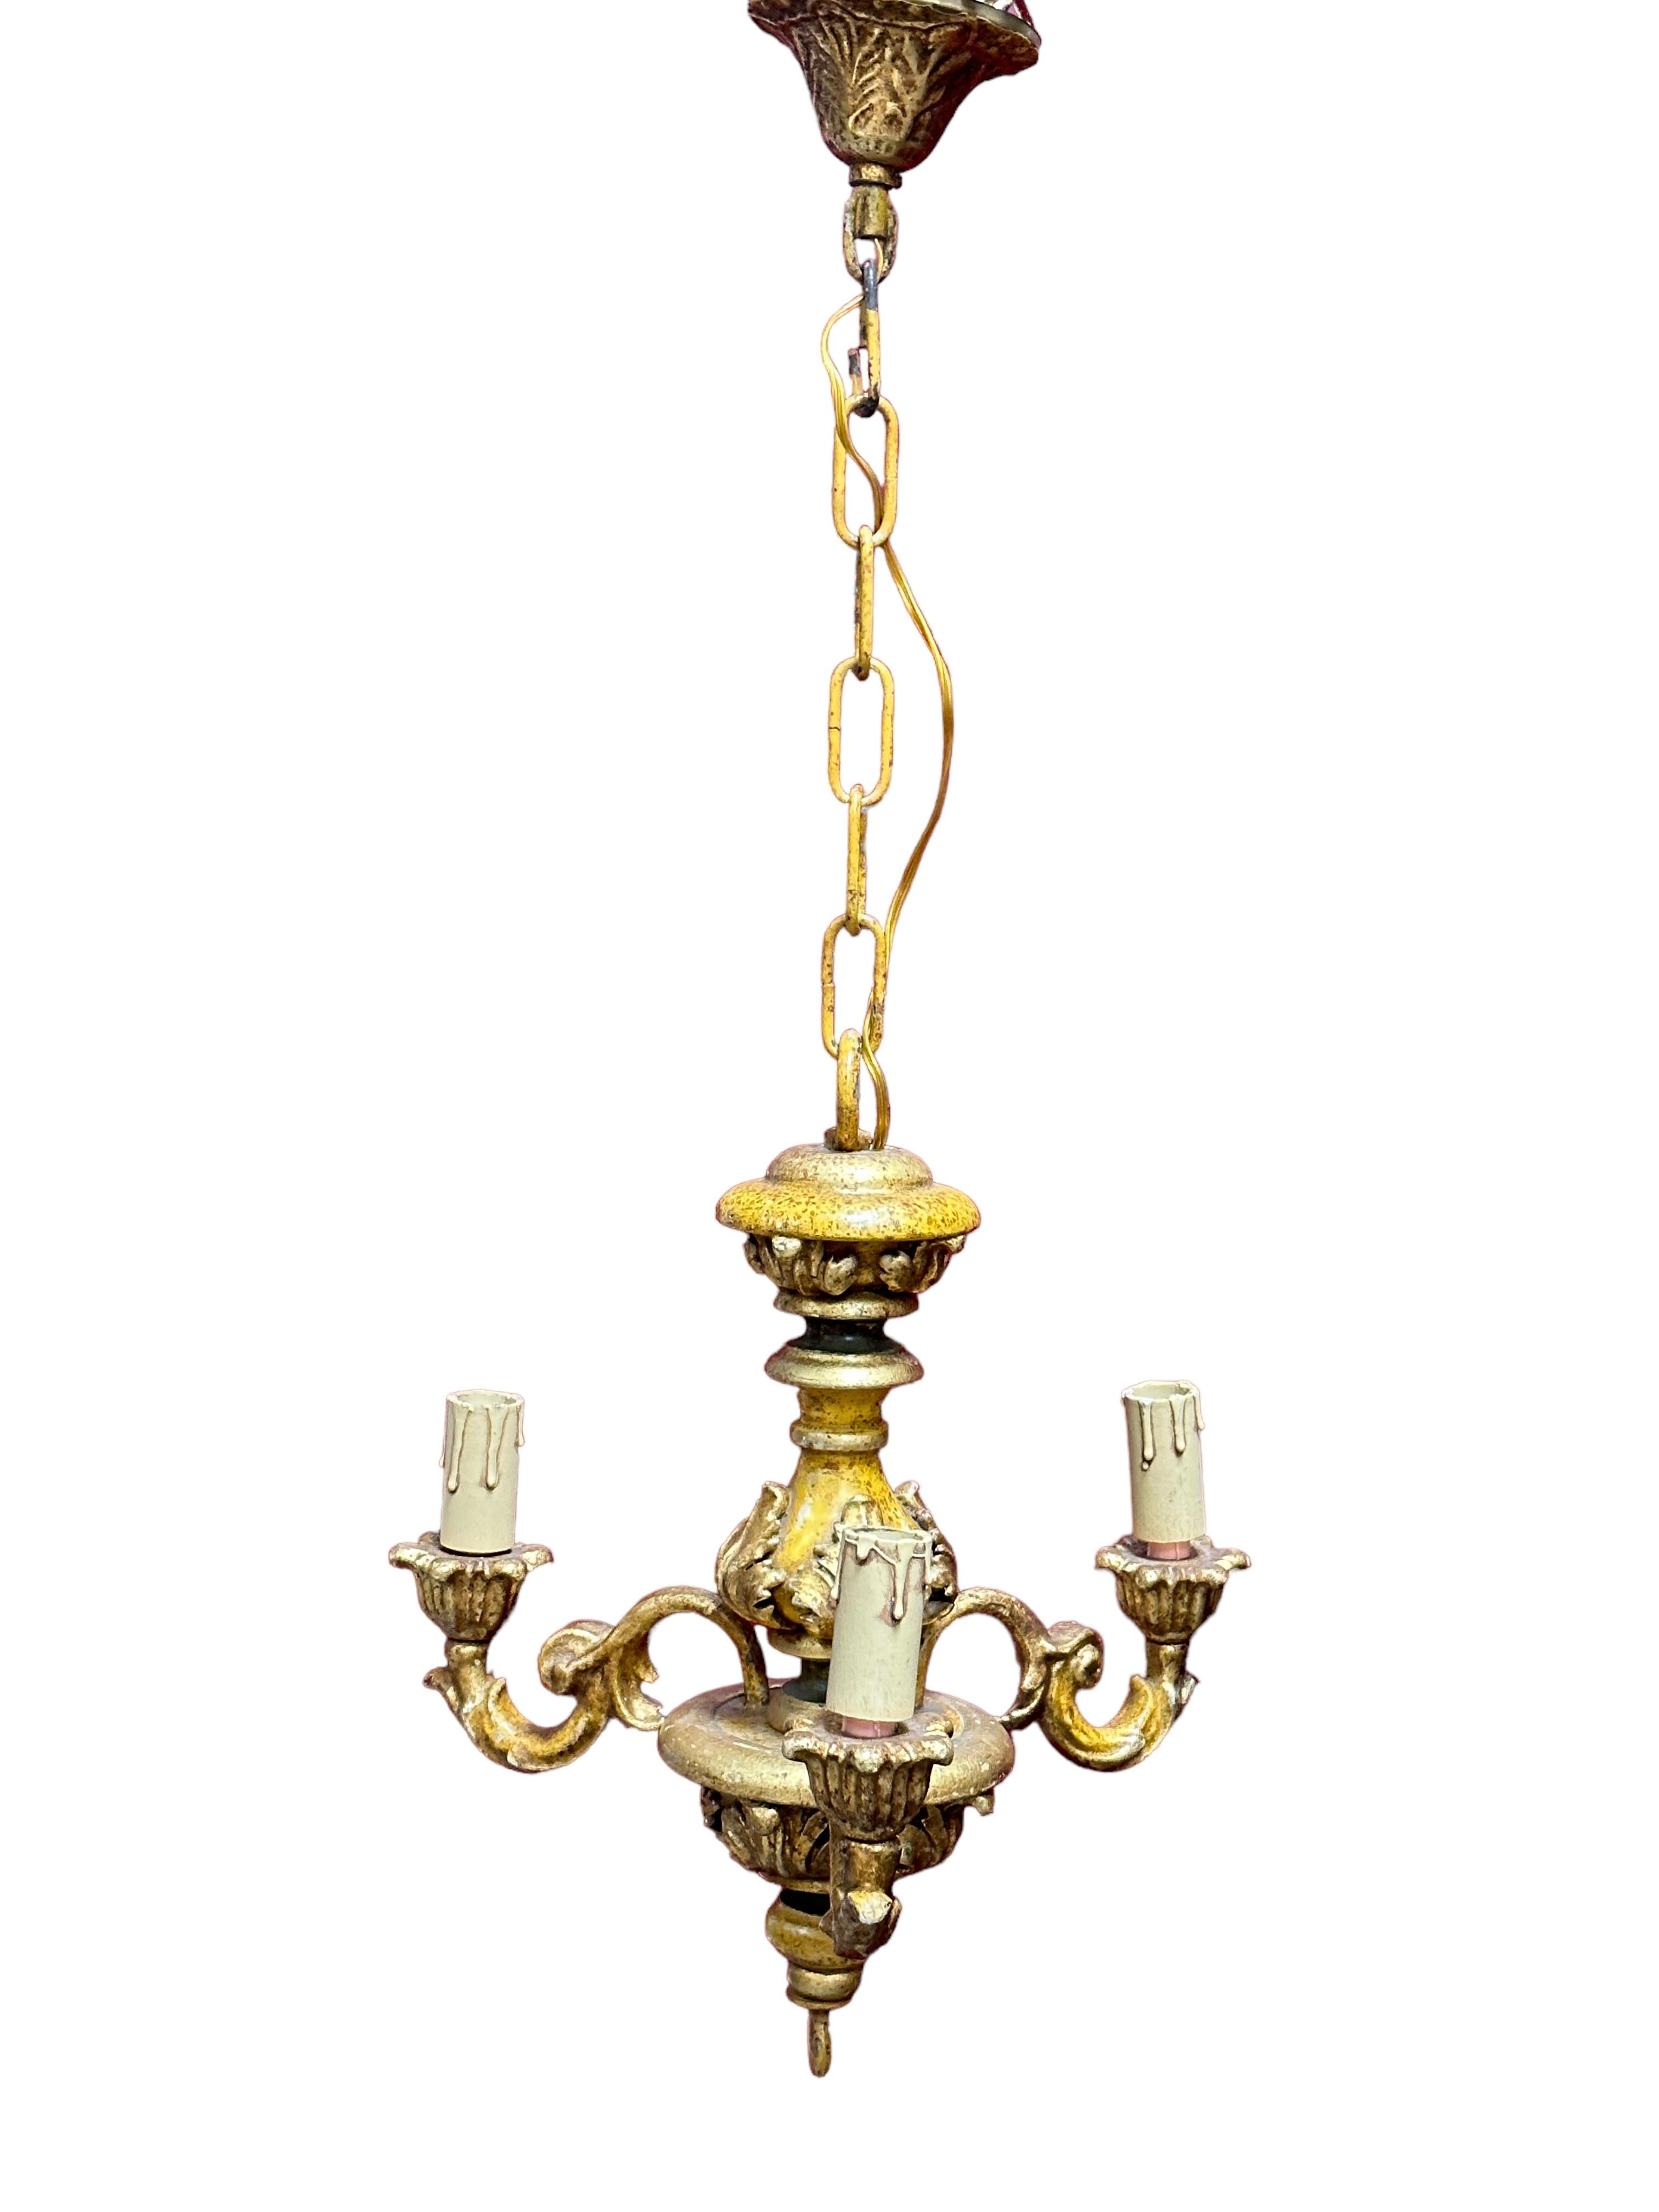 Add a touch of opulence to your home with this charming chandelier! Perfect cream white, gilt wood and hand carved chandelier to enhance any chic or eclectic home. We'd love to see it hanging at a dinning place as a charming welcome. The chain with